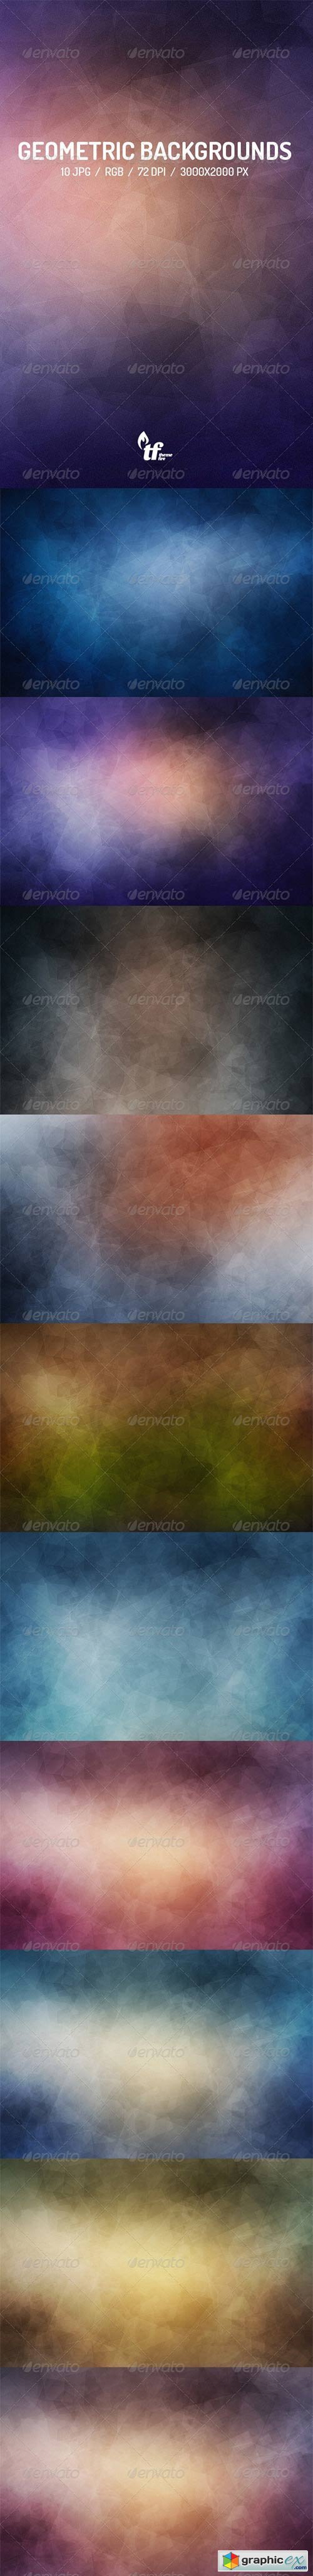 Geometric Abstract Backgrounds